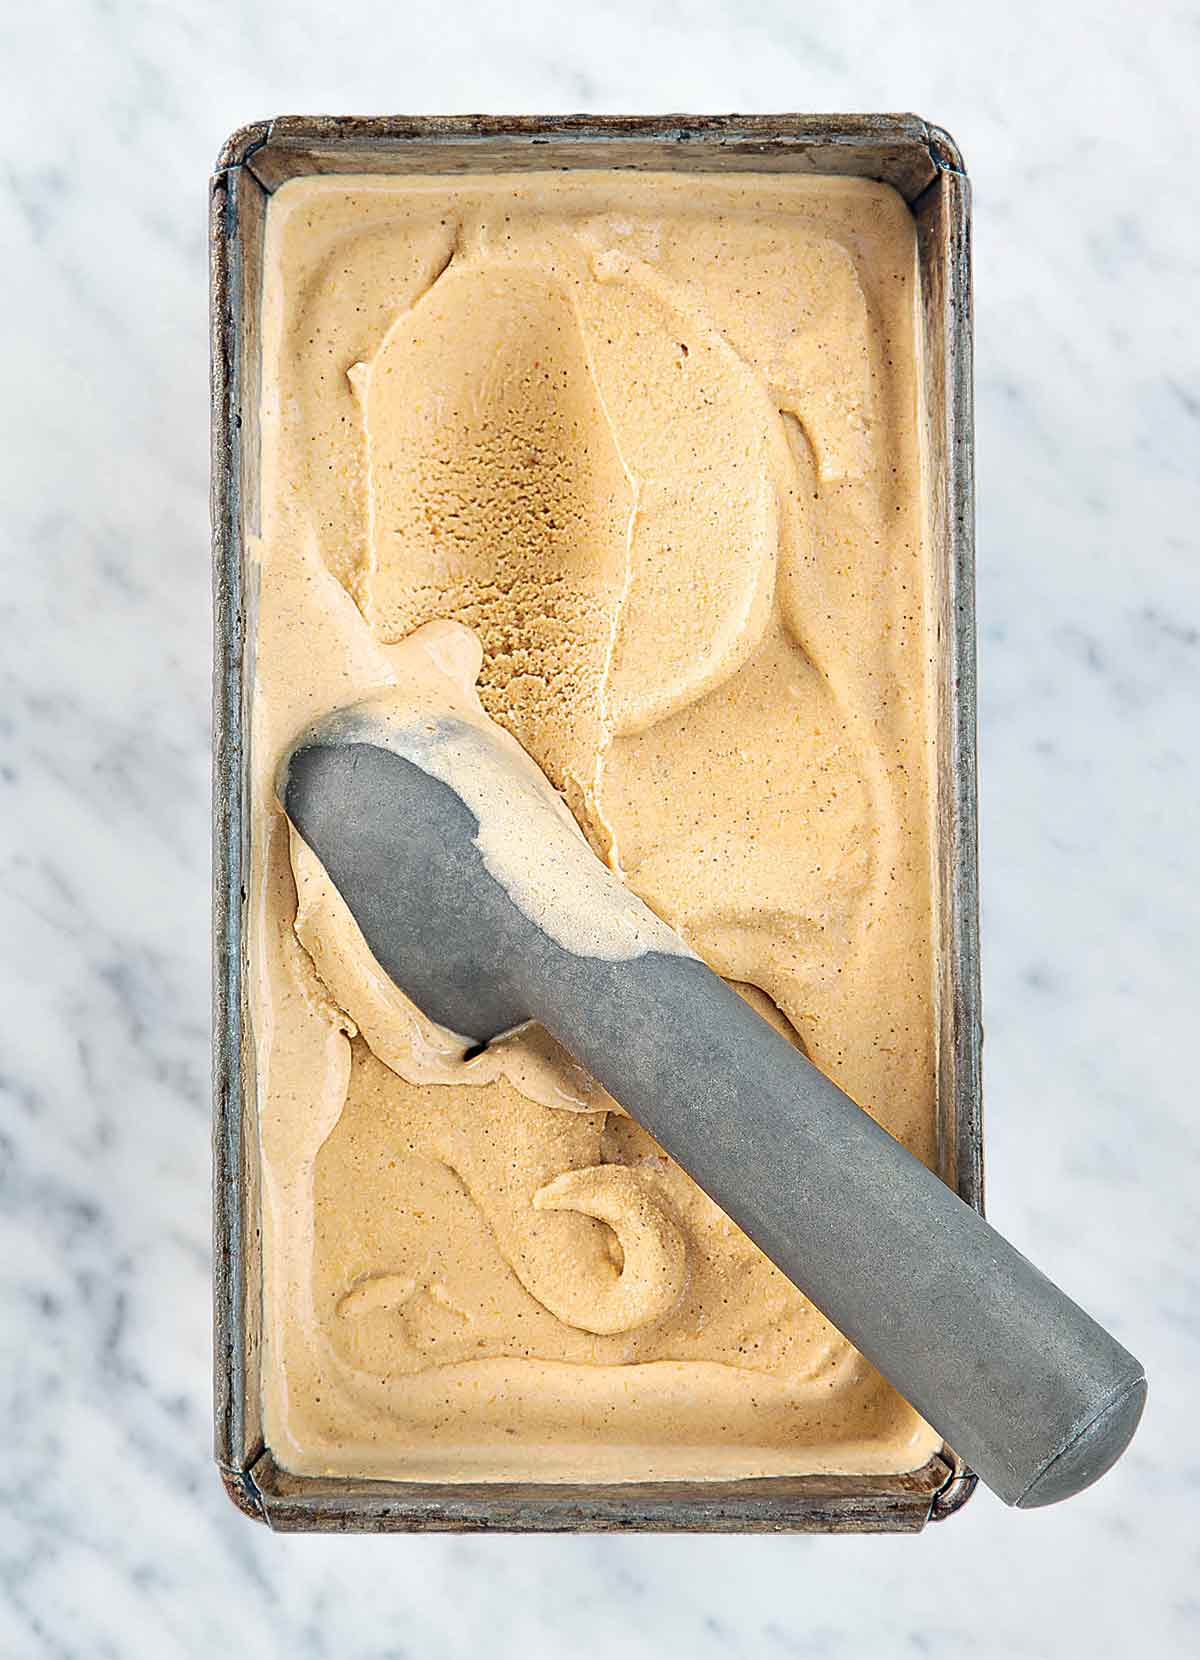 A metal container filled with pumpkin ice cream and a metal ice cream scoop resting inside.